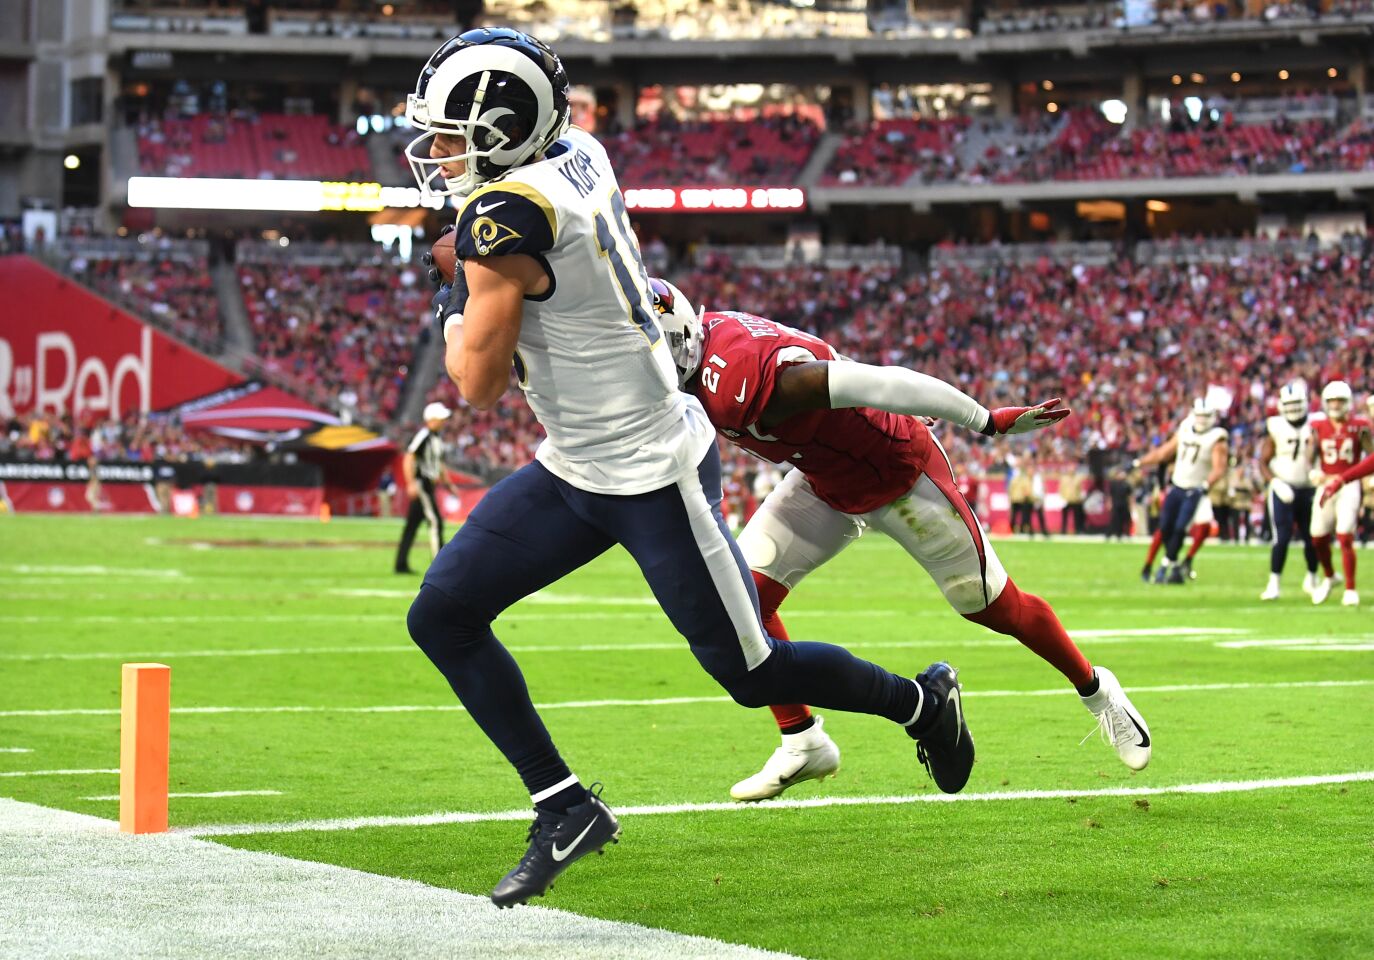 Rams wide receiver Cooper Kupp catches a touchdown pass in front of Cardinals cornerback Patrick Peterson.